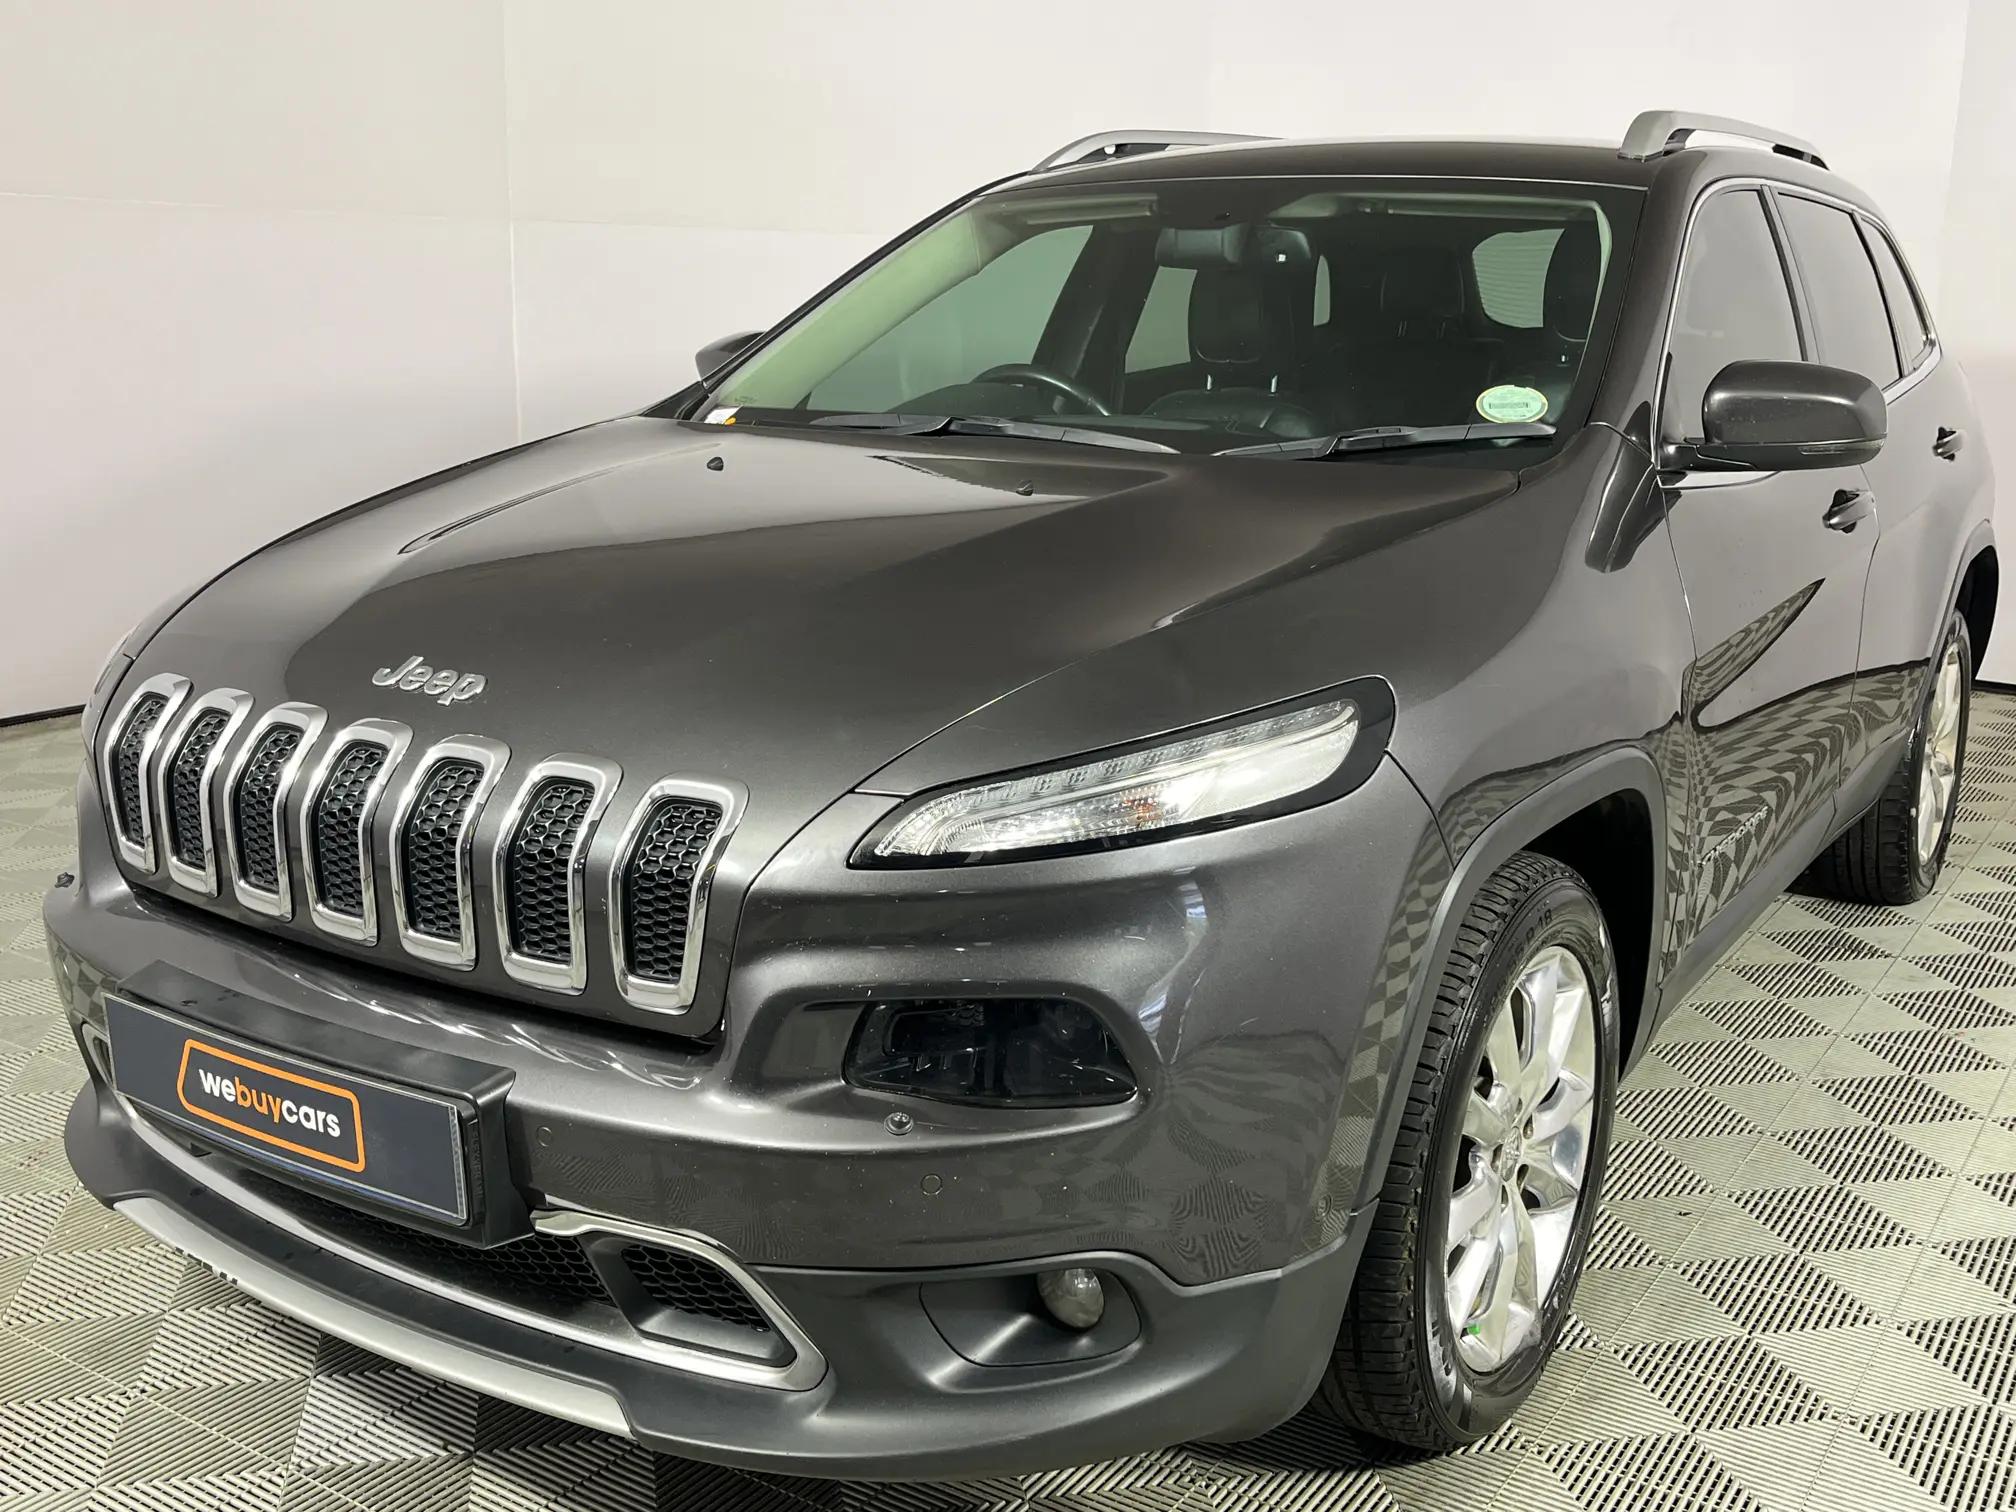 Jeep Cherokee 3.2 Limited 2WD